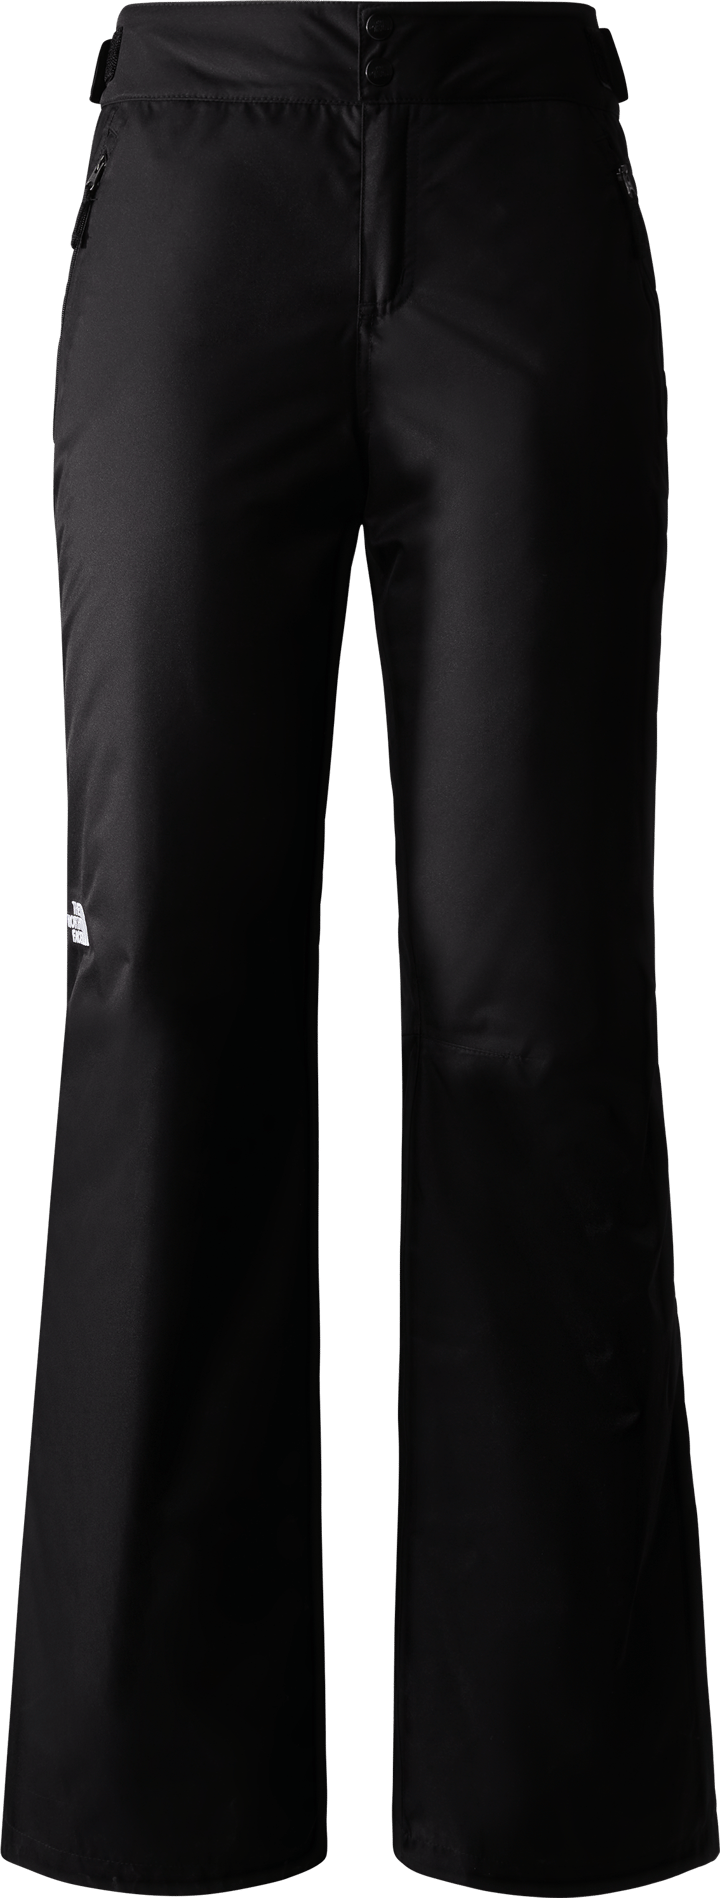 The North Face Sally Insulated Pant - Ski trousers Women's